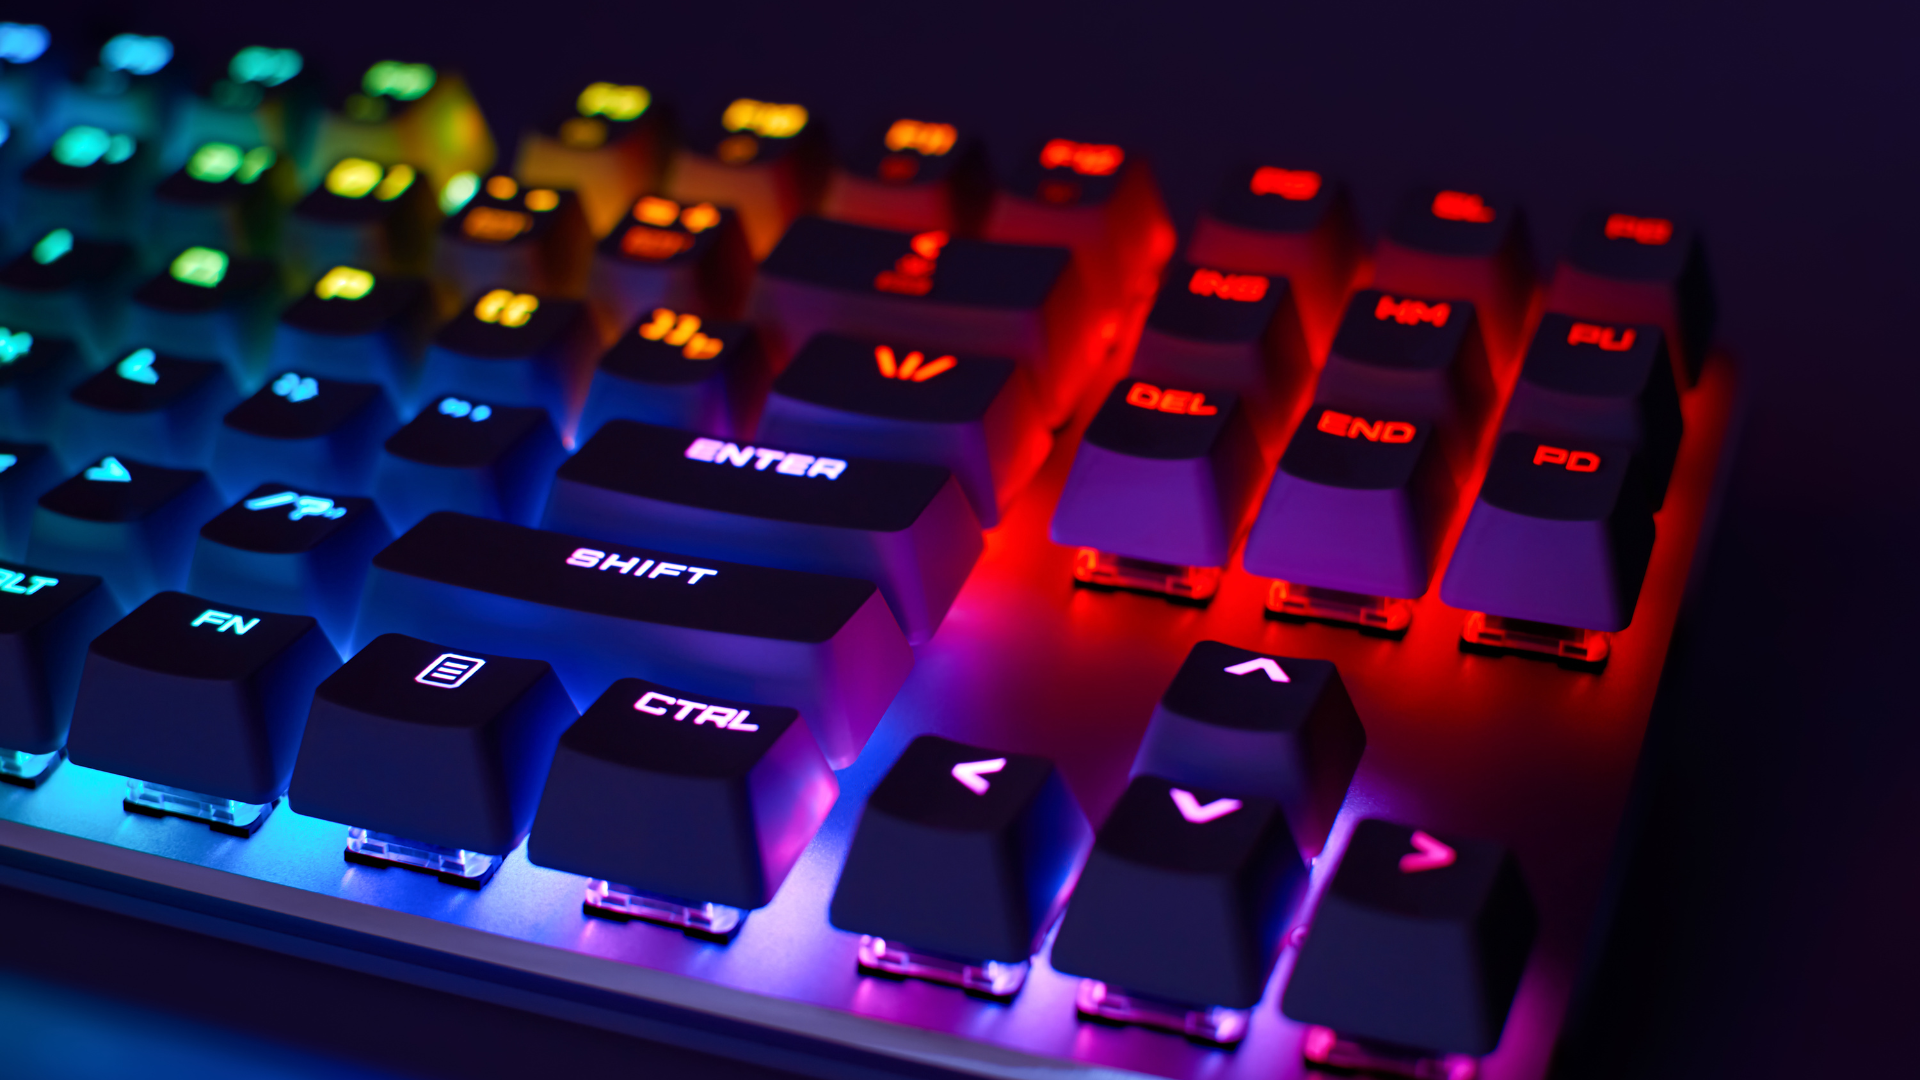 The Best Gaming Keyboards On The Market